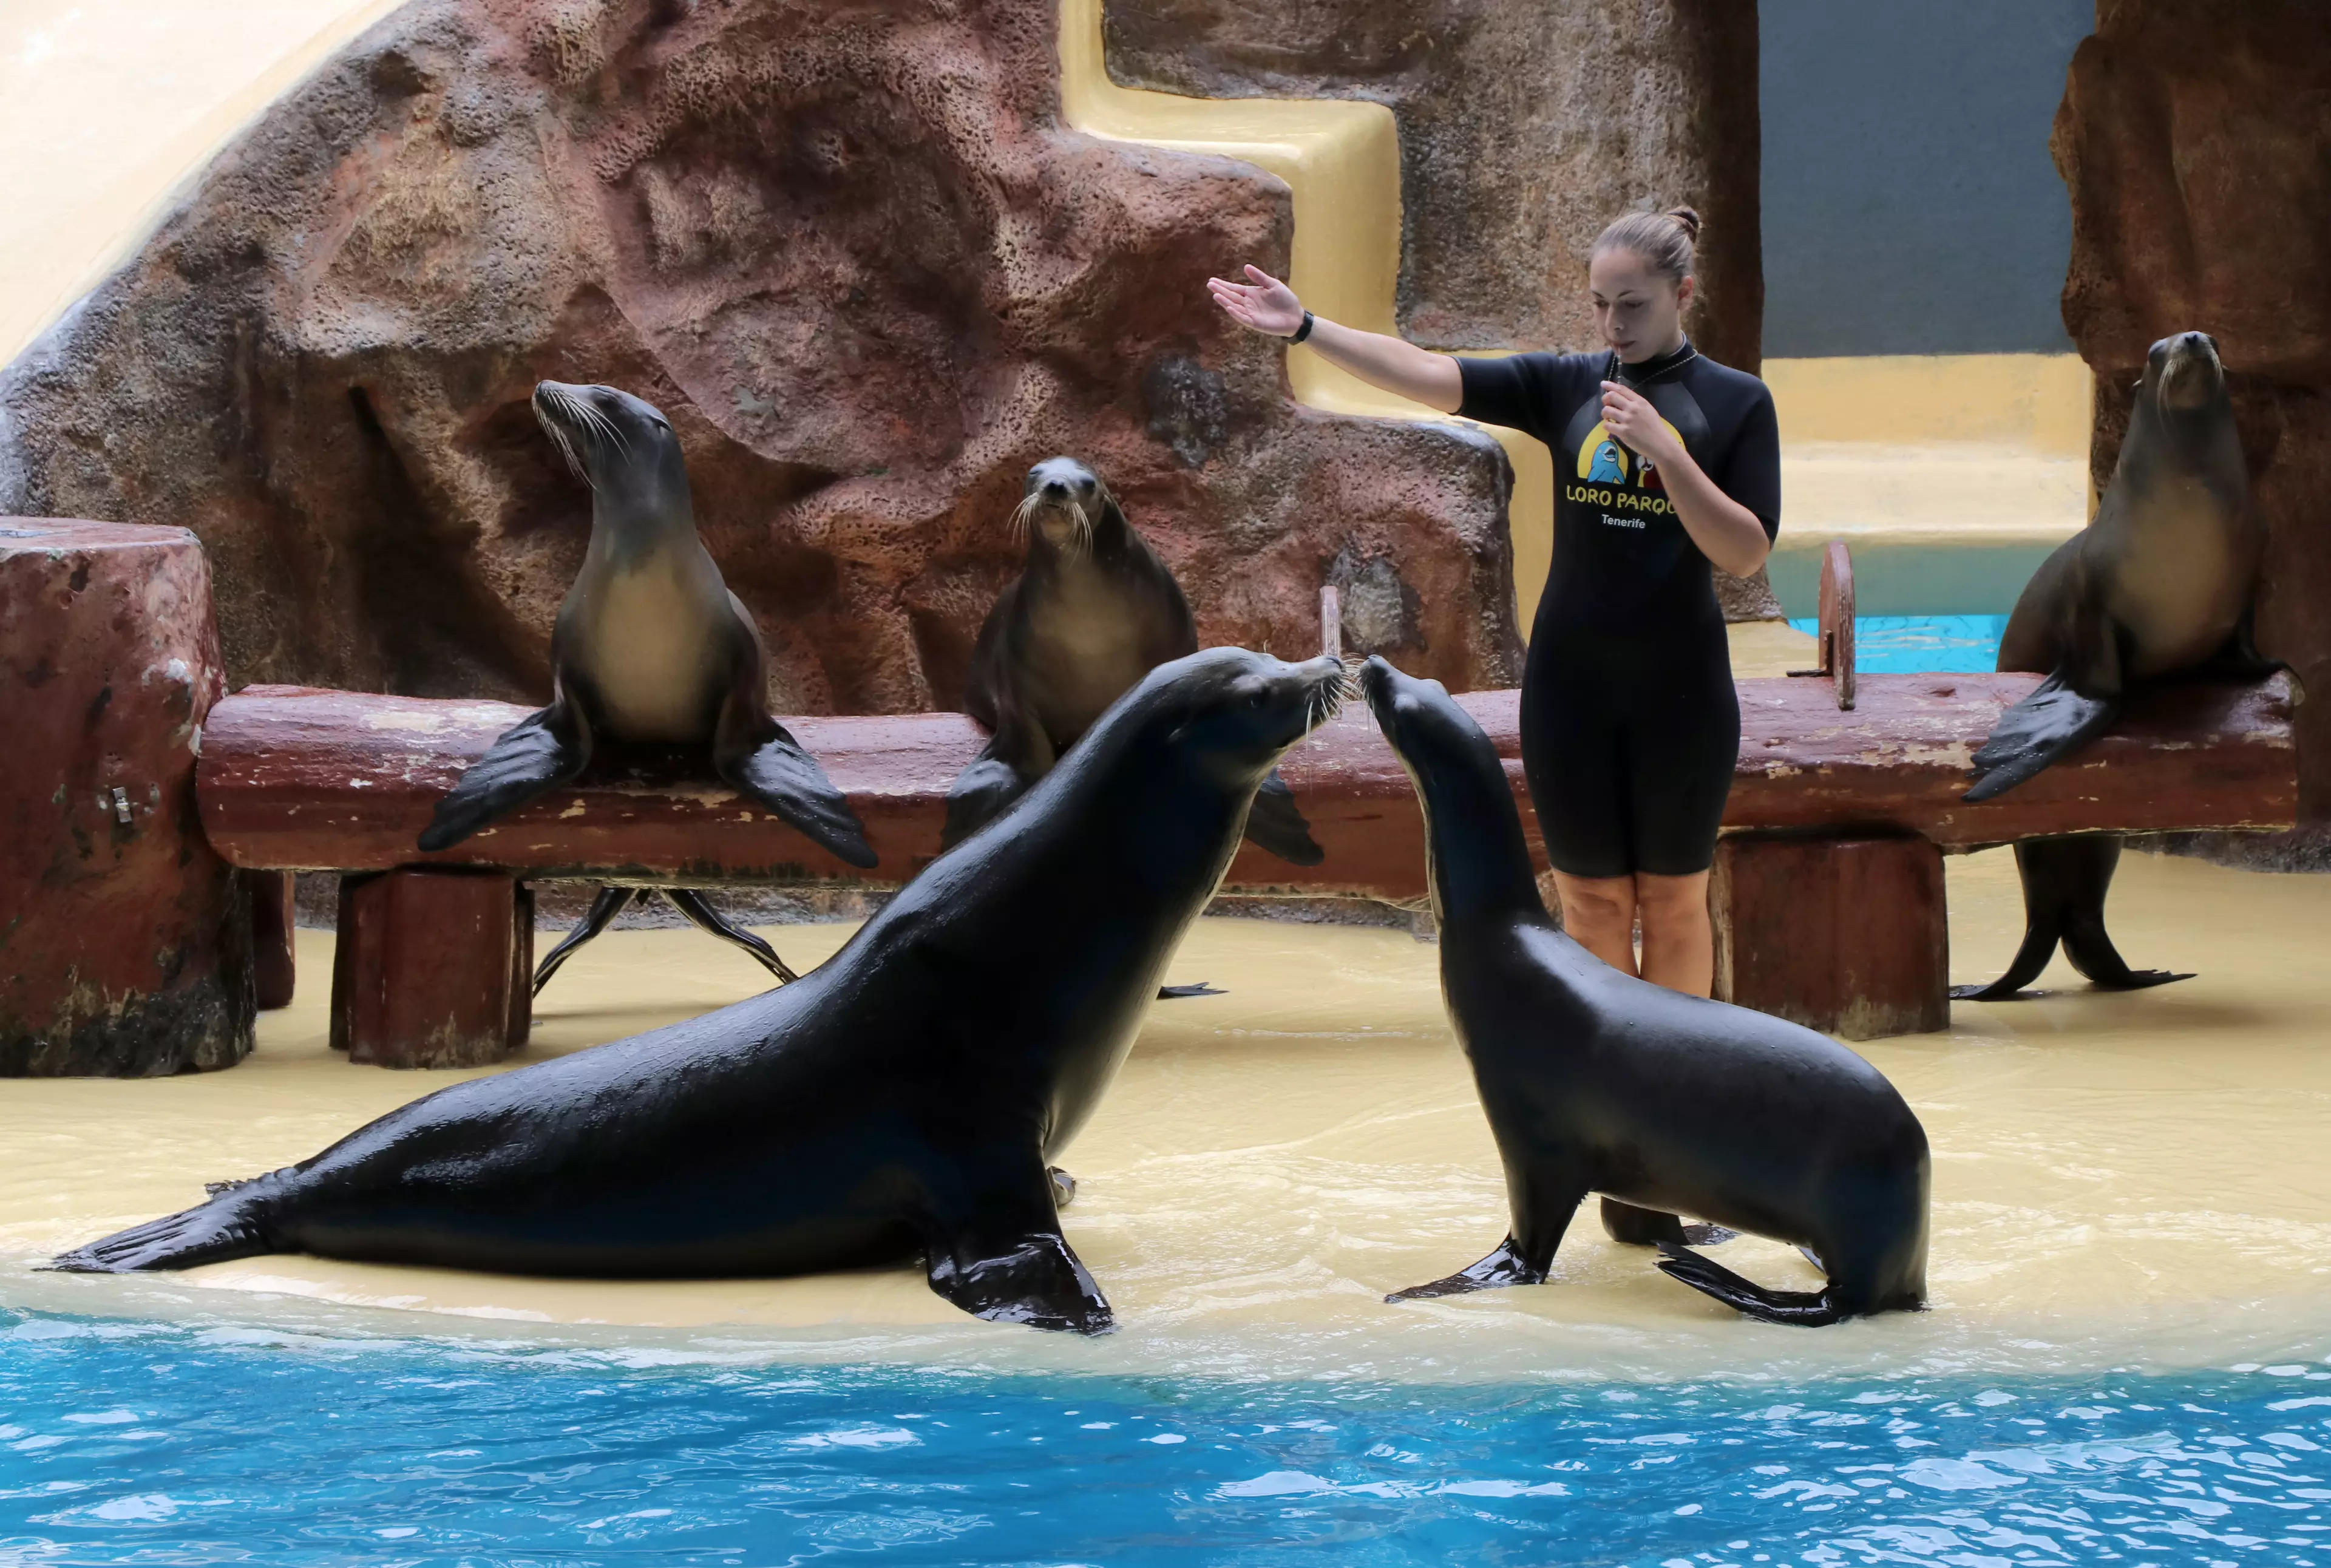 Loro Parque will also be affected